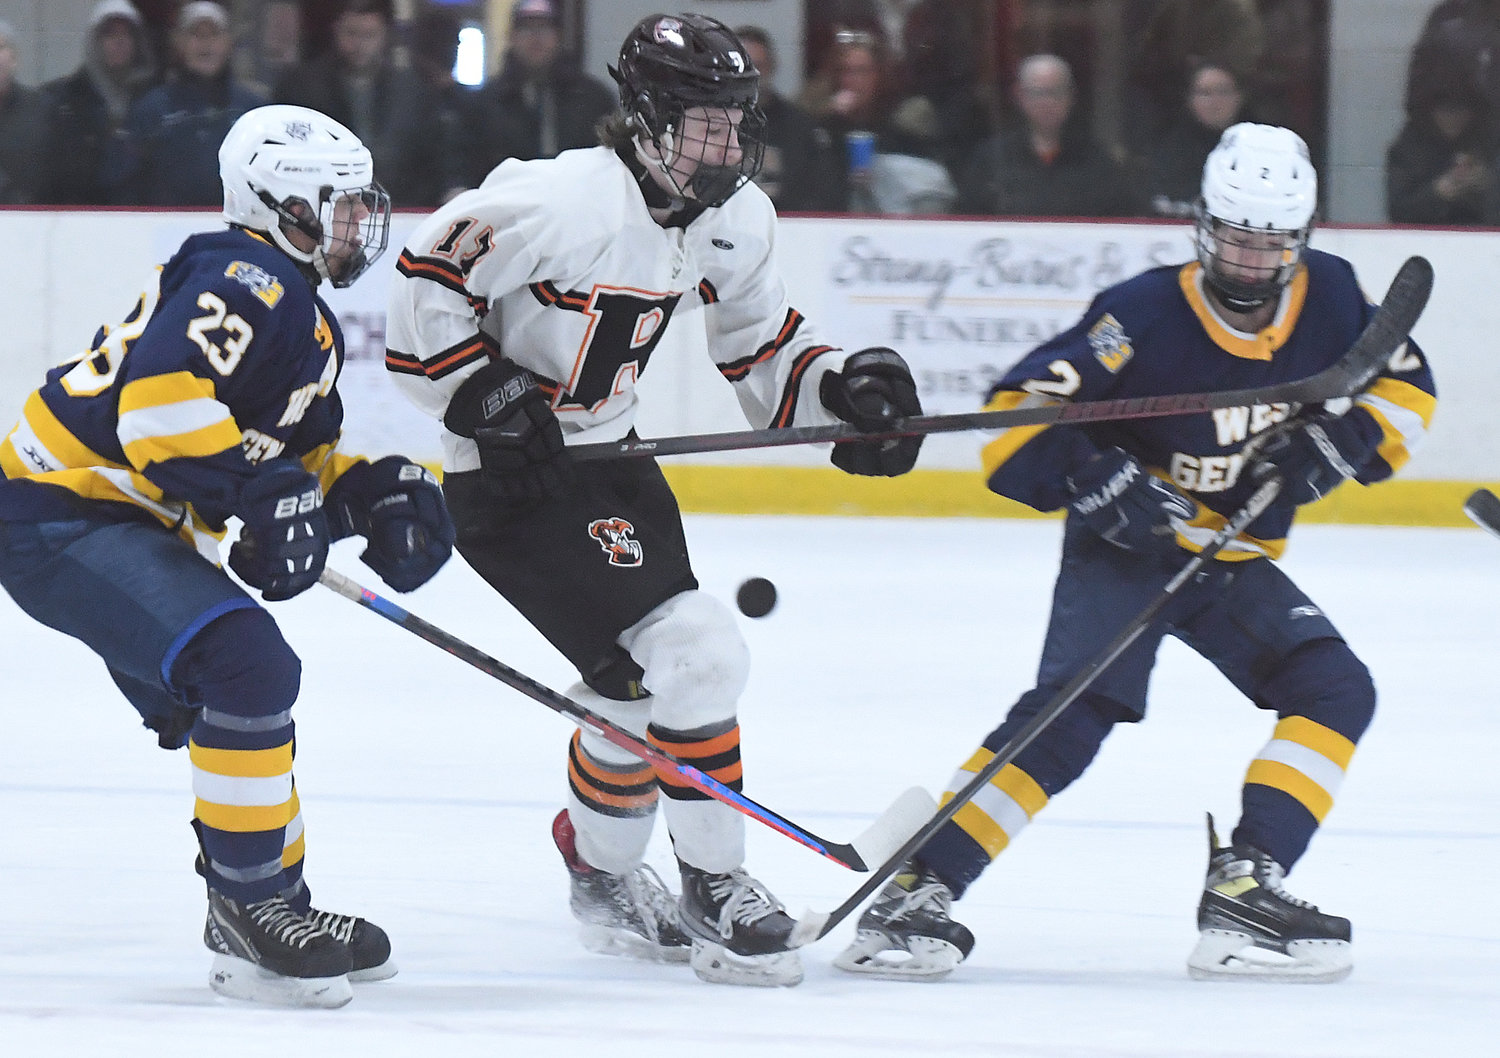 Jimmy Deangelo of Rome Free Academy, middle, looks to settle the puck in between West Genesee's Jack Mellen, left, and Christian Ball in the first period Tuesday night at Kennedy Arena. Mellen's two goals were part of team's offensive outpouring in a 10-1 win.